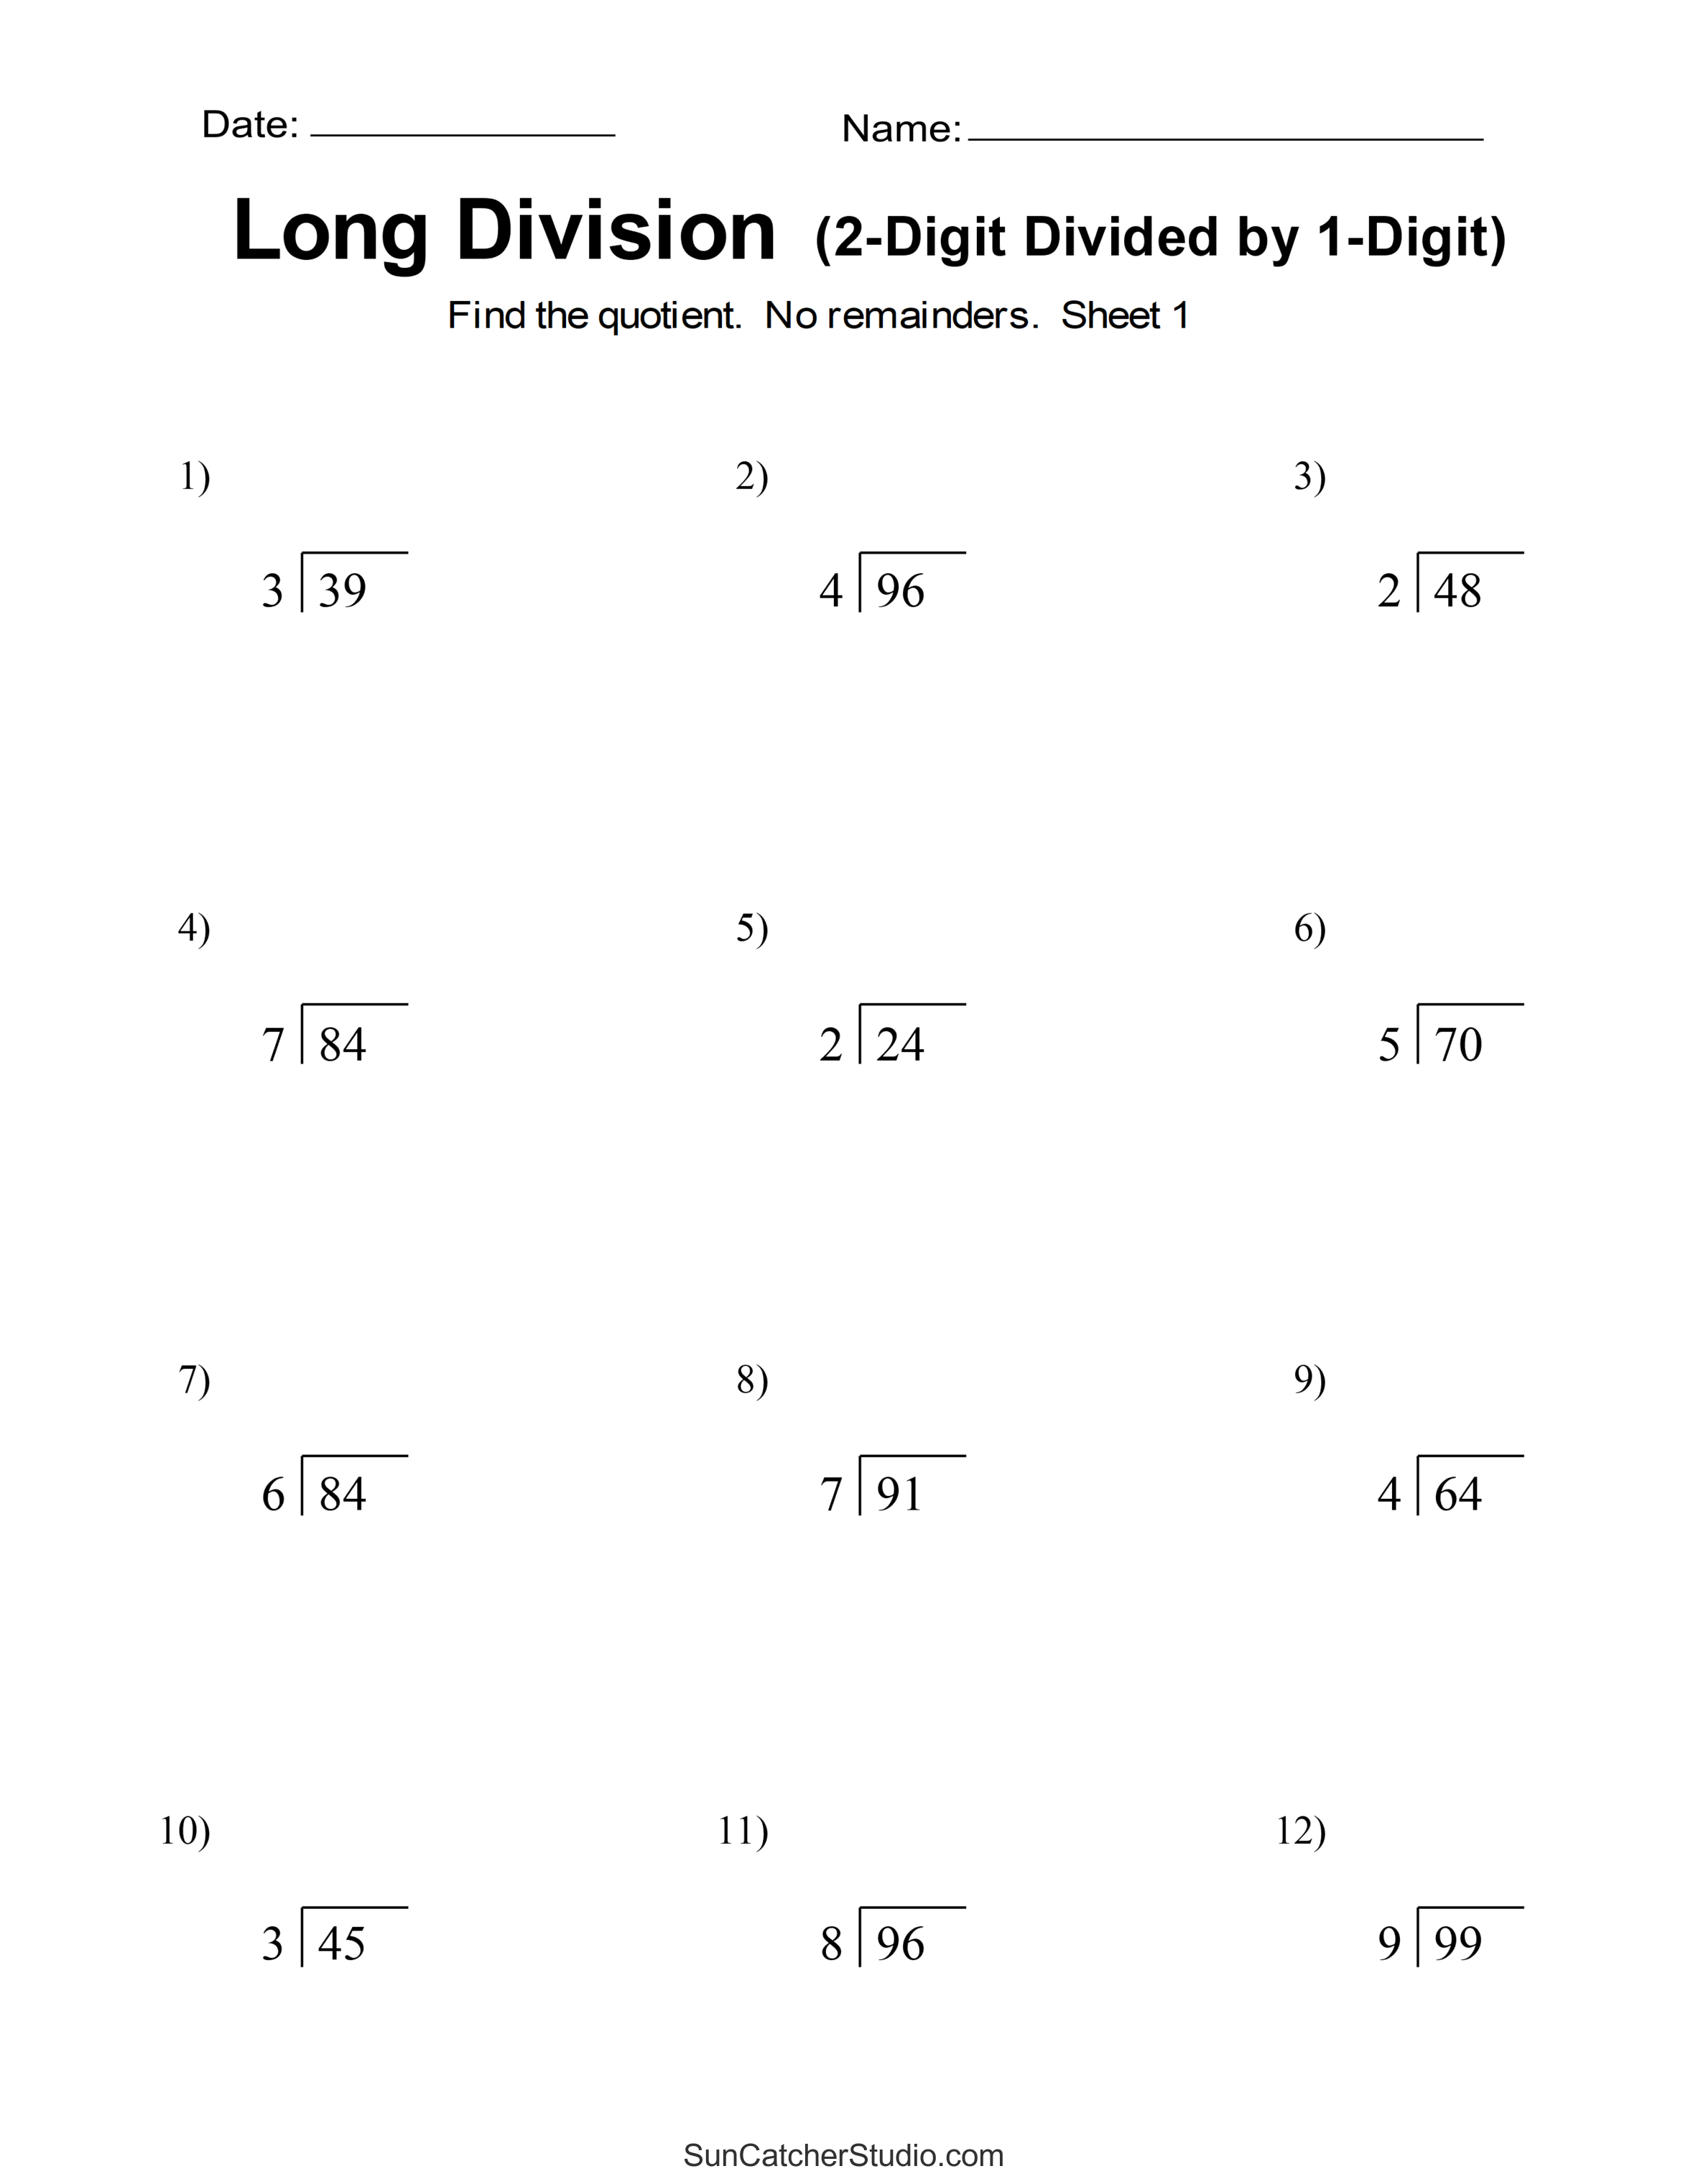 Long Division Worksheets Problems Free Printable Math Drills DIY Projects Patterns